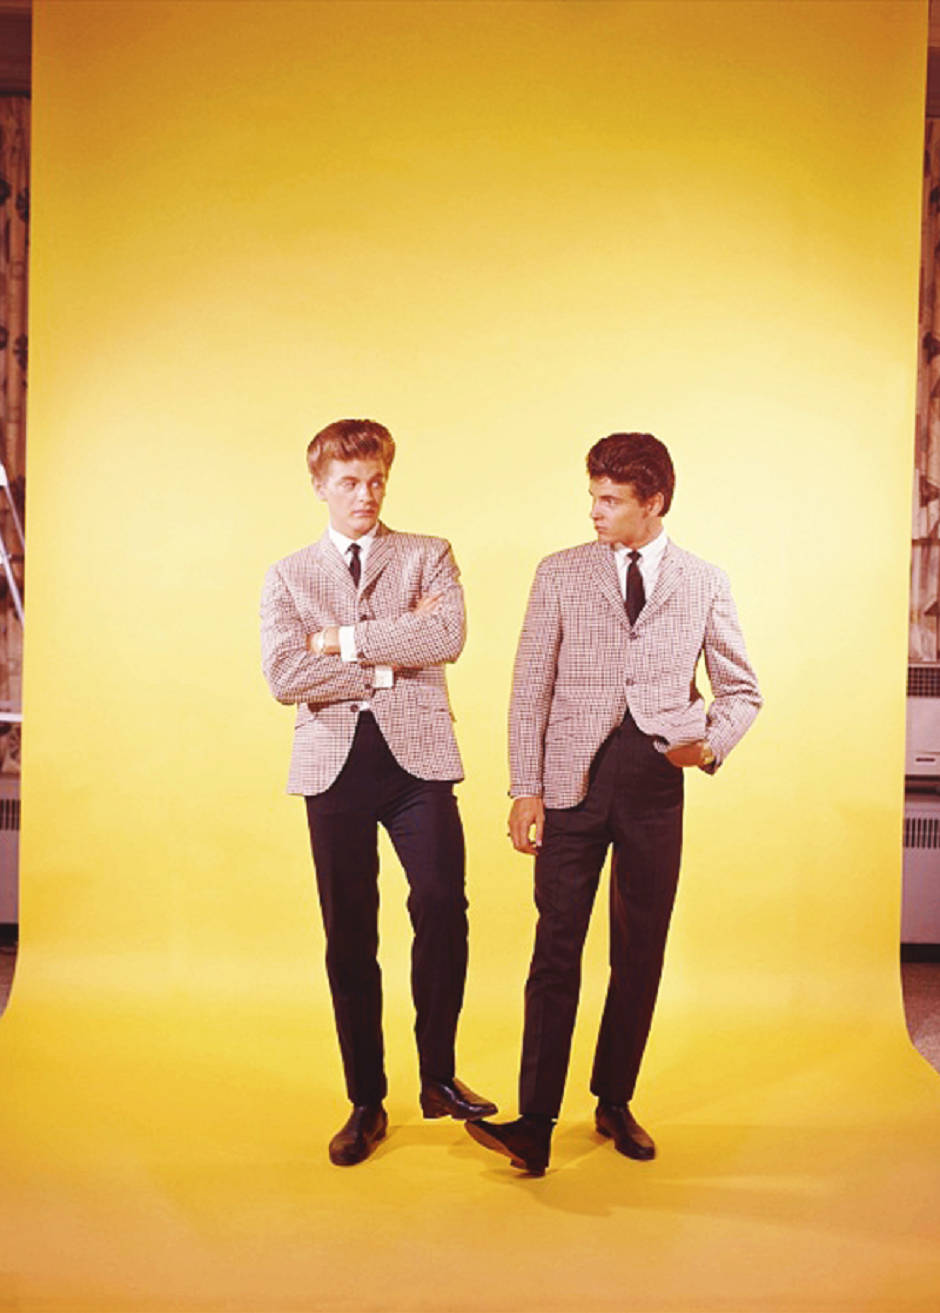 Pop Kendte Musikere Everly Brothers Studio Skydning Wallpaper